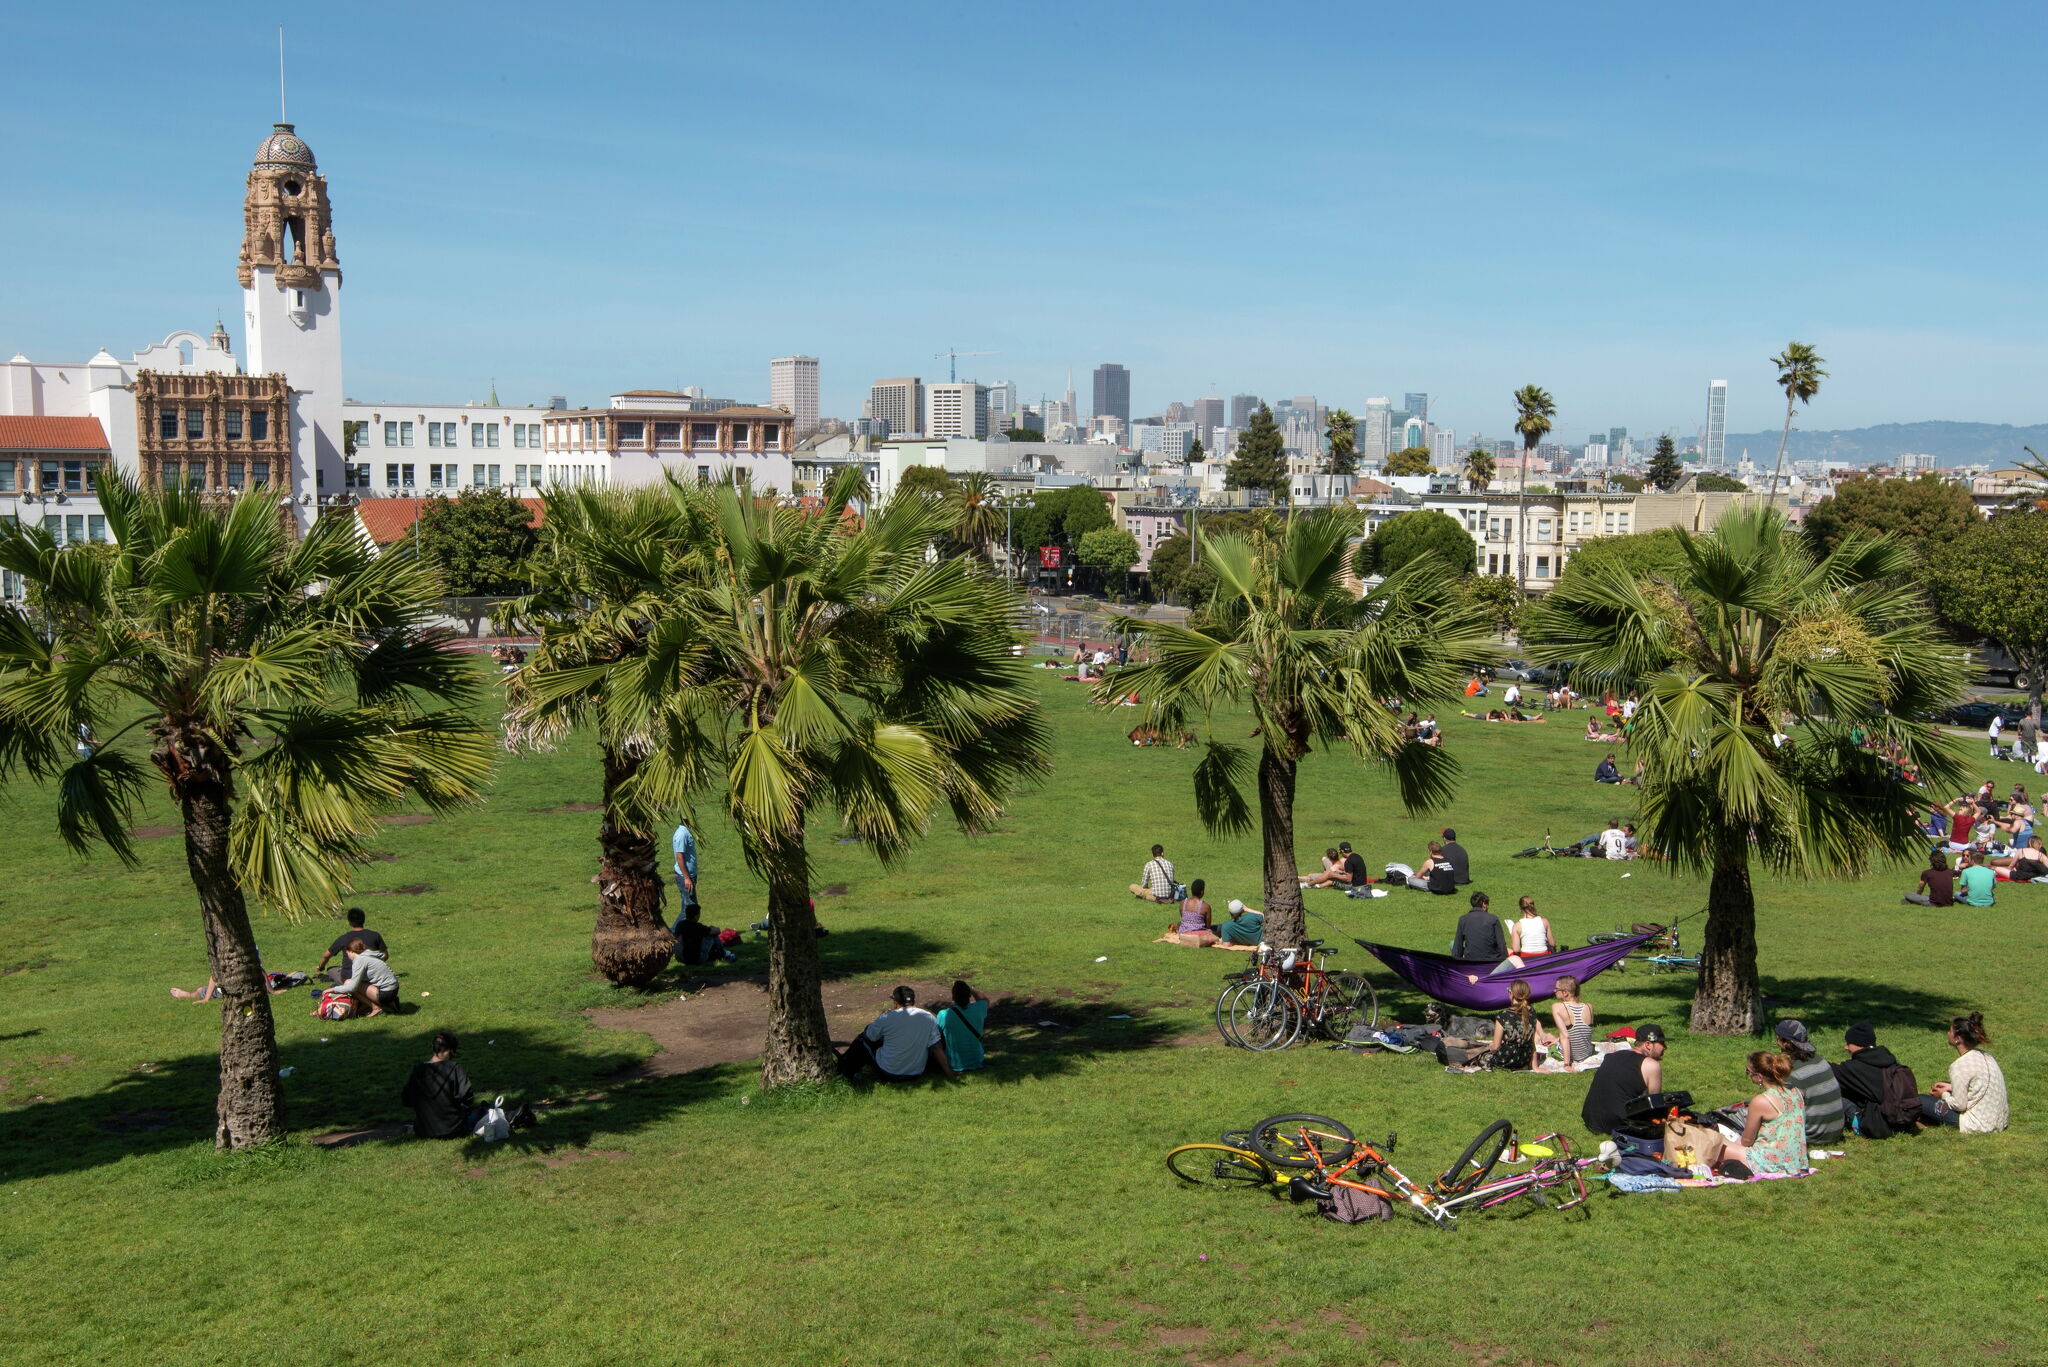 Couple assaulted near Dolores Park in broad daylight, police say